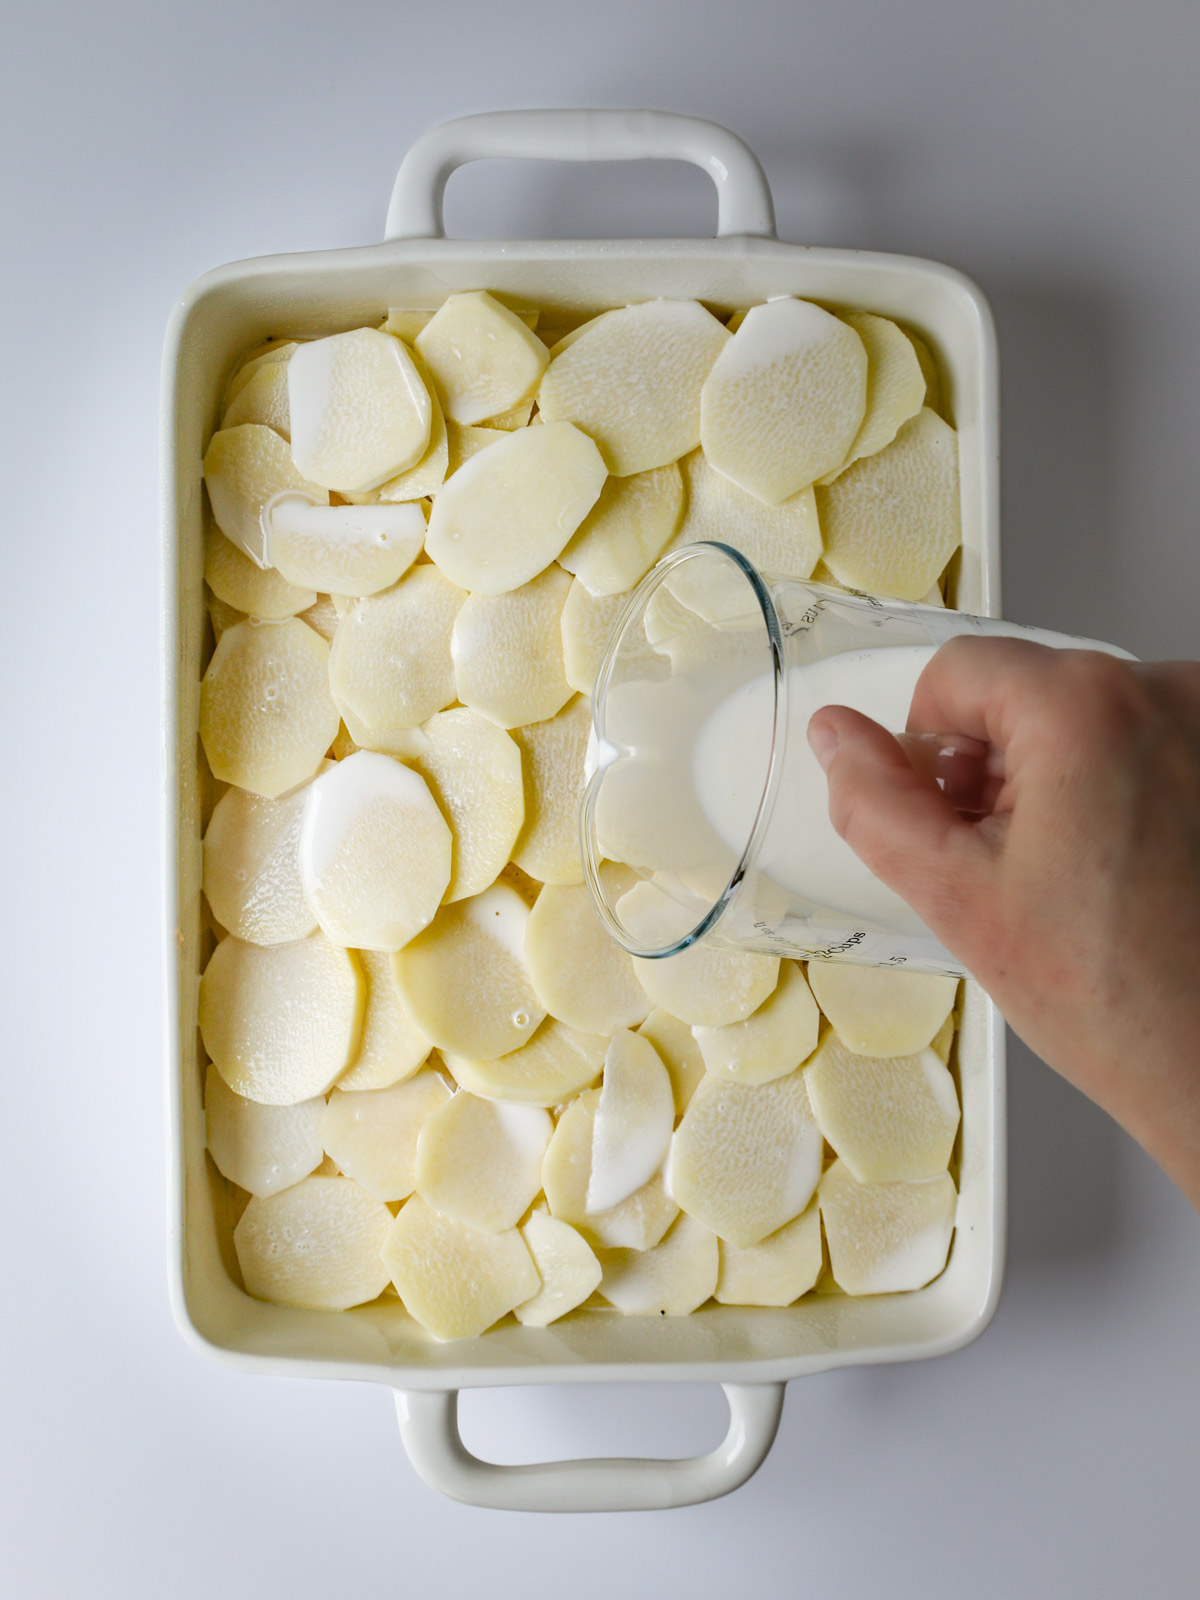 pouring half and half over layered potatoes in a baking dish.